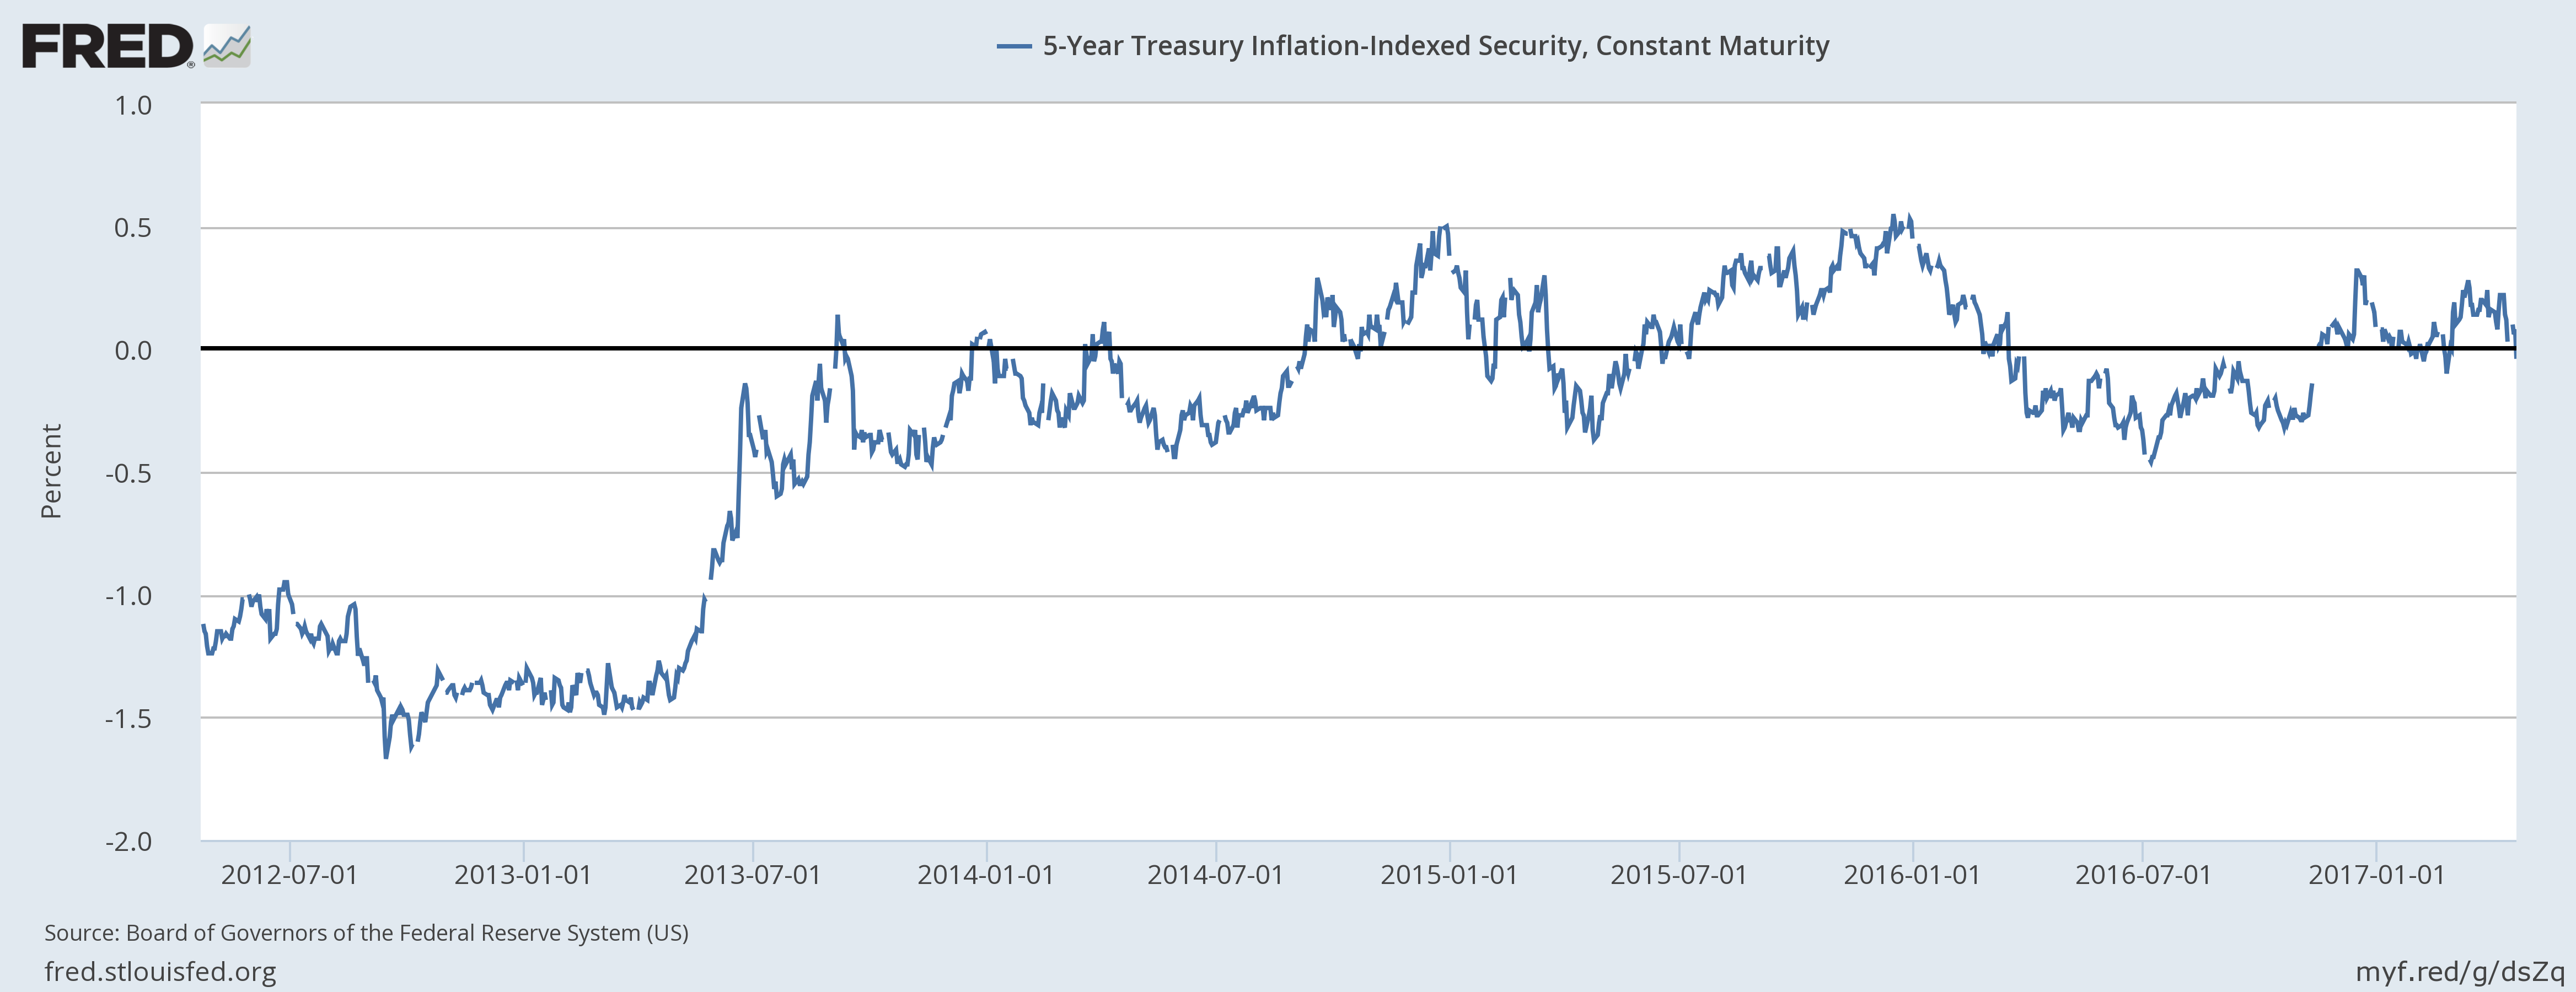 5 Year Treausury Inflation Indexed Security, Constant Maturity